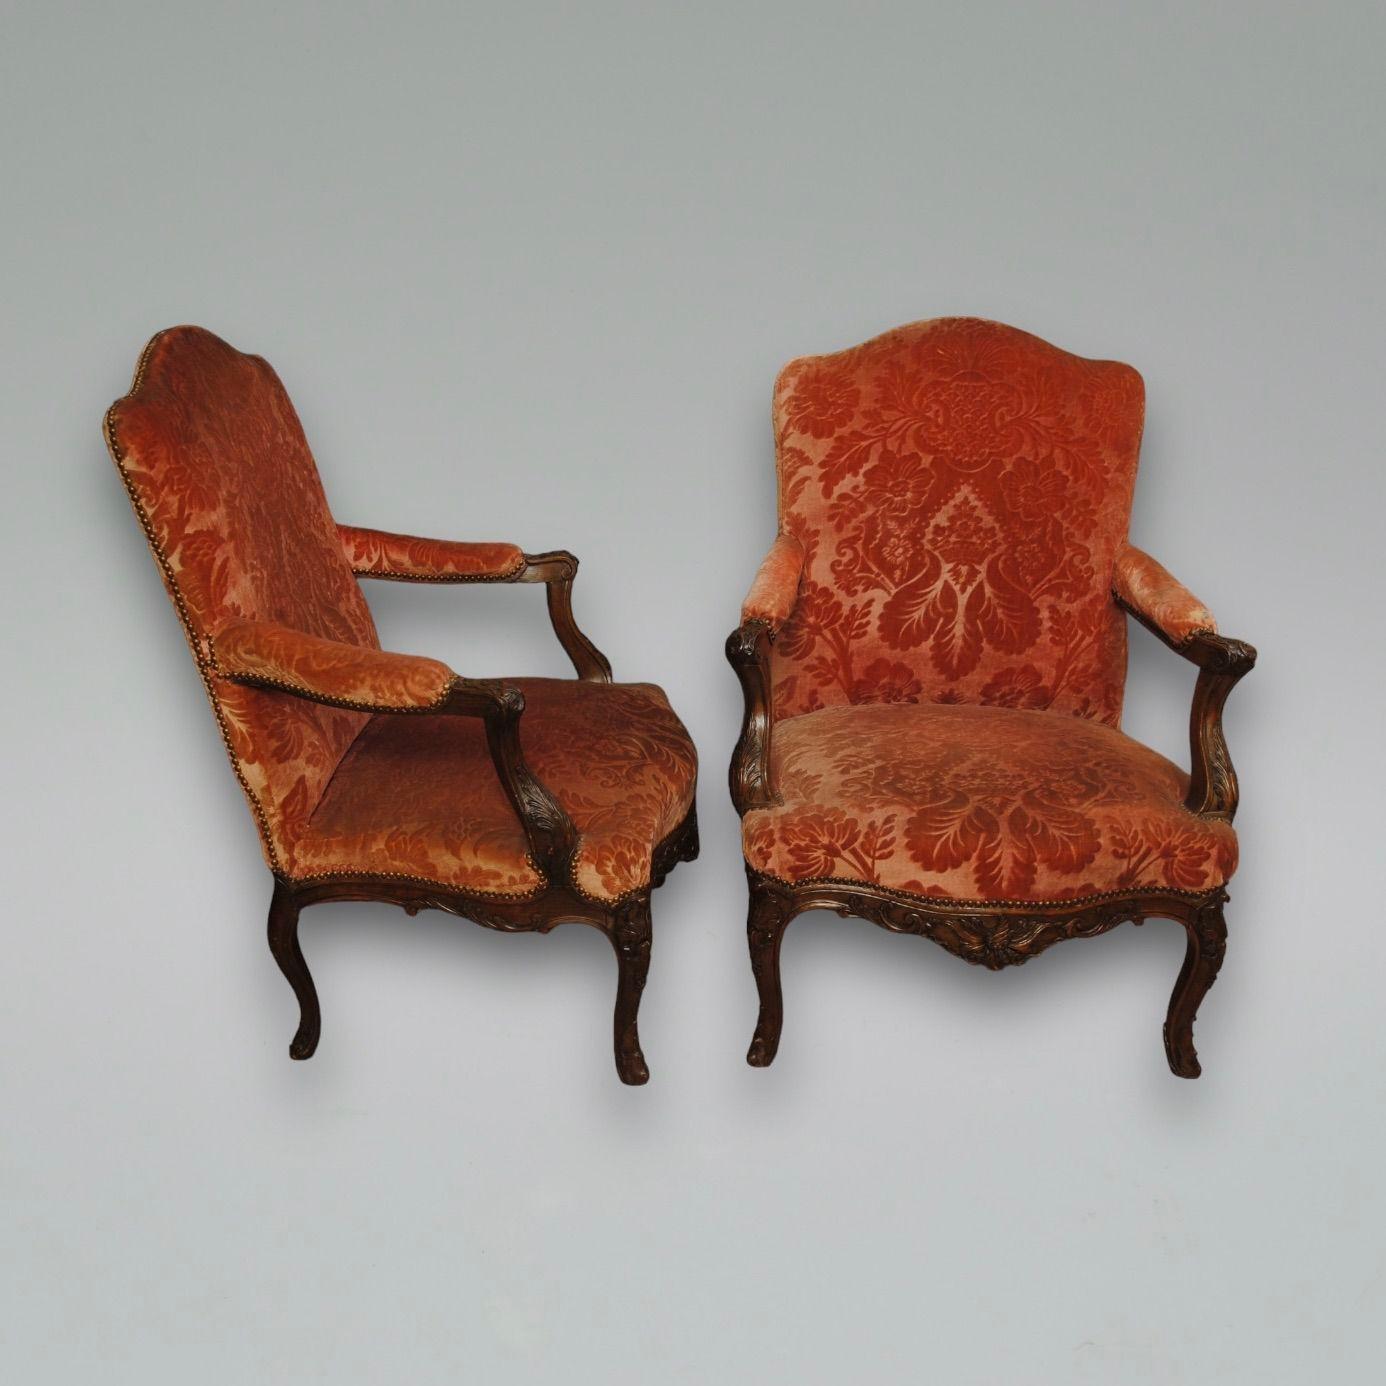 A decorative pair of mid 19th century carved walnut open armchairs of good size.